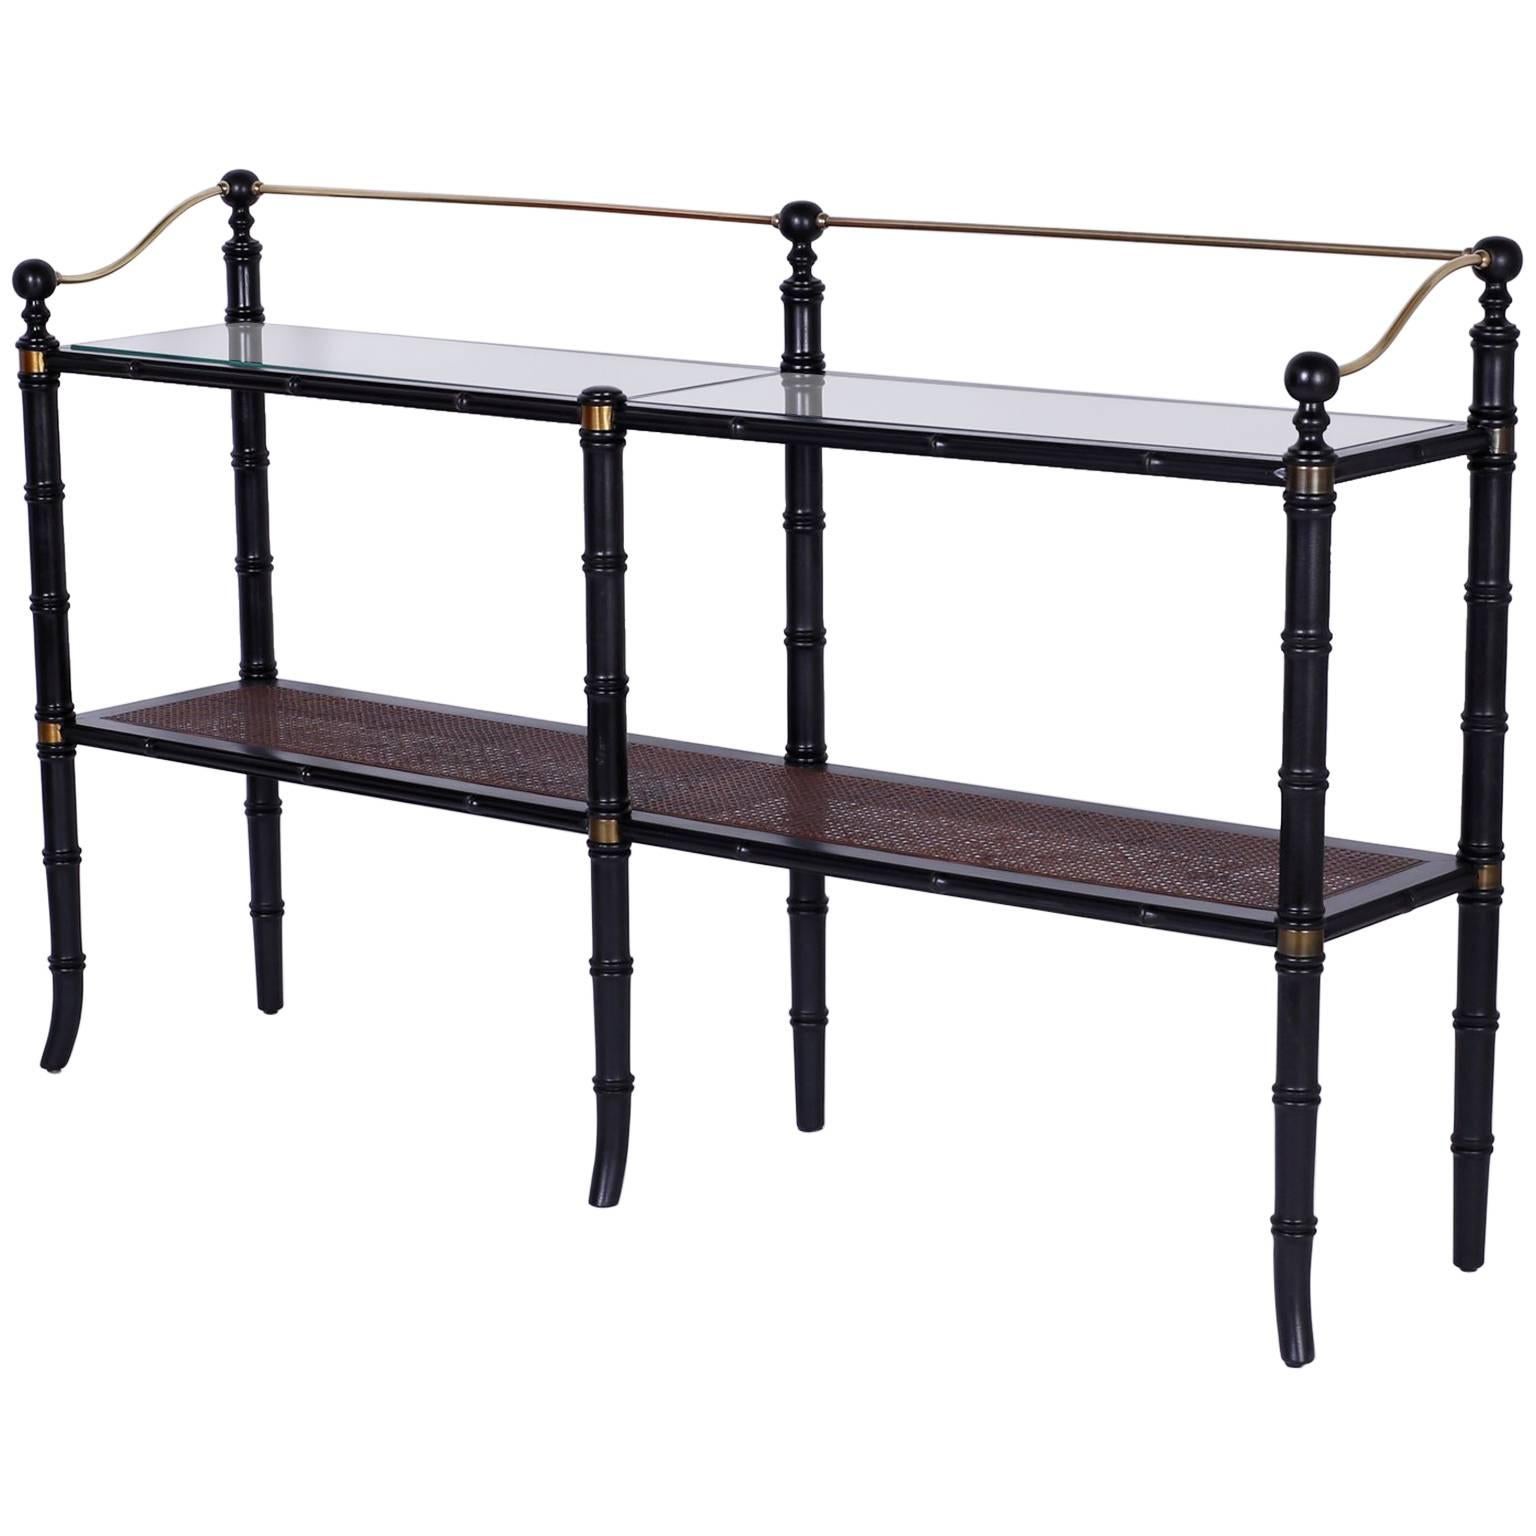 Chic Campaign Style Caned Two-Tiered Shelf or Étagère